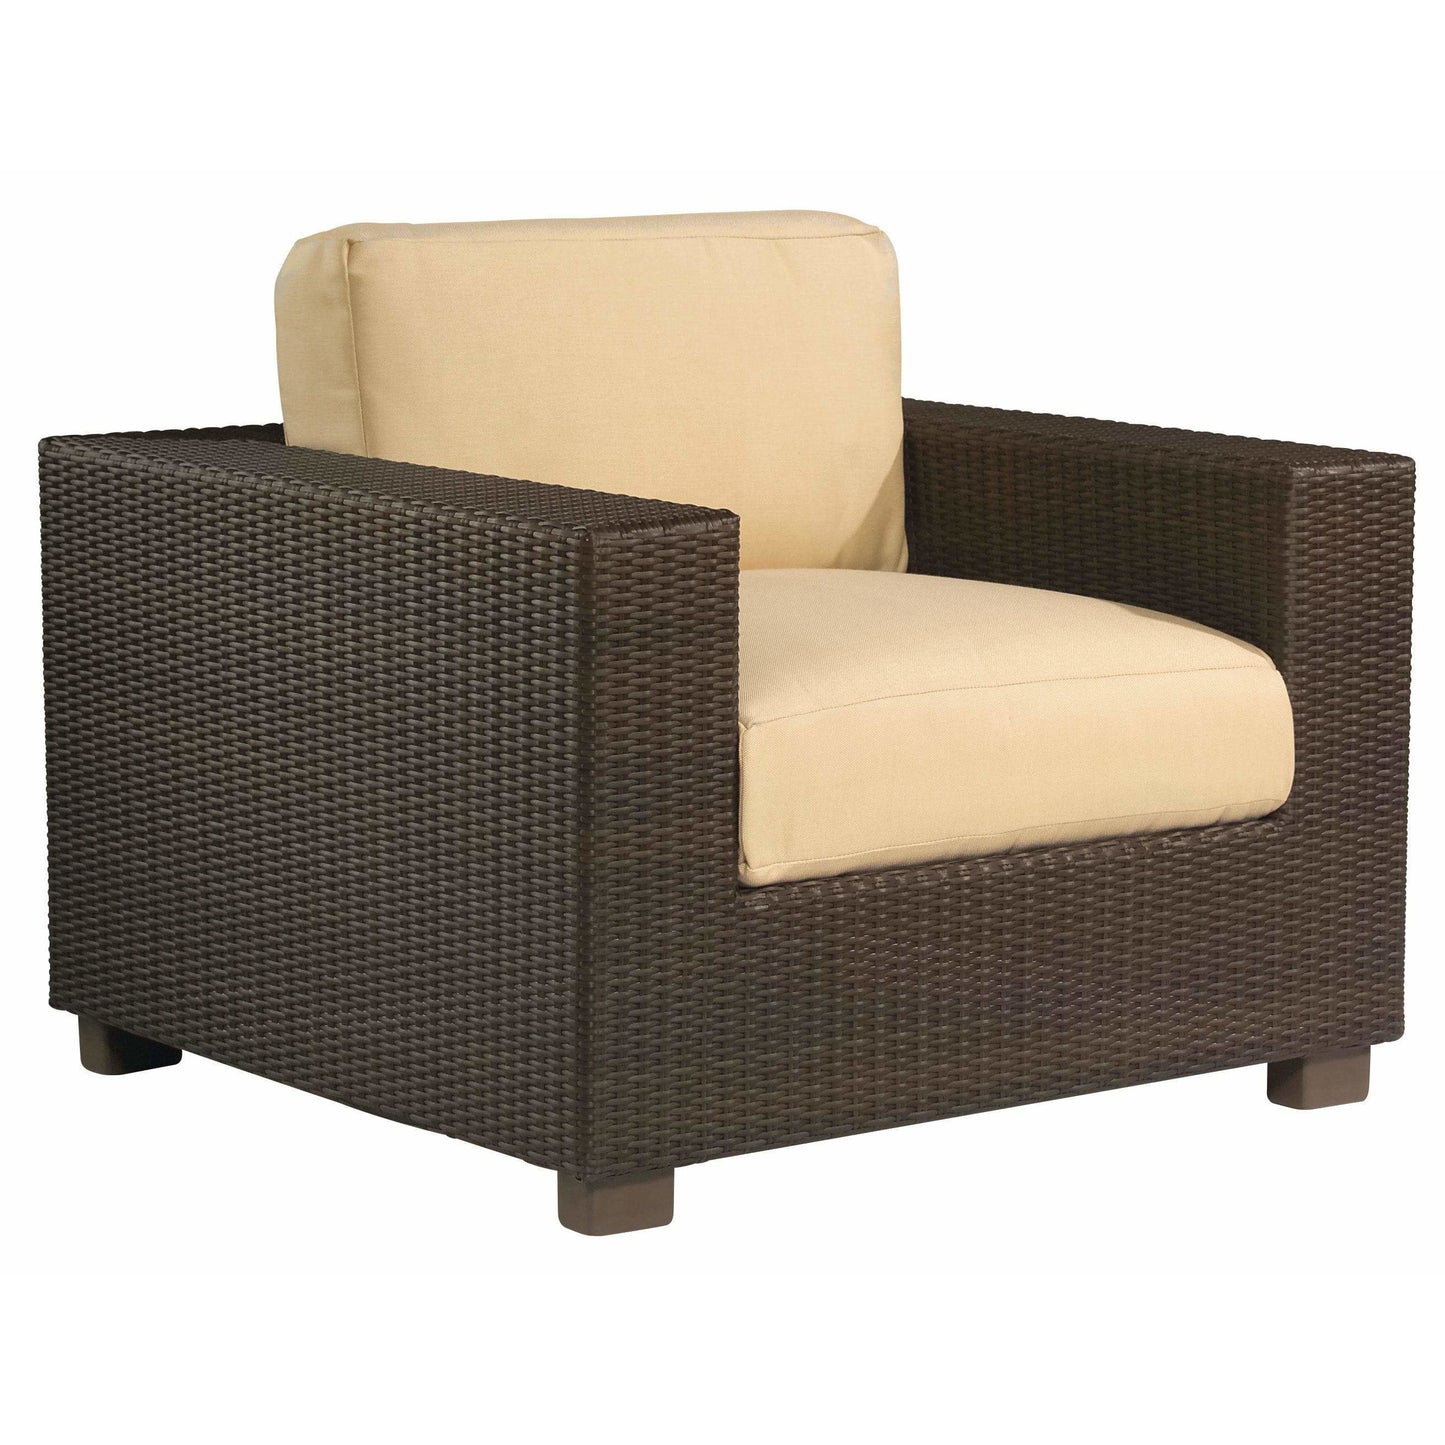 Lounge Chair S511001 Woodard Outdoor Patio | Montecito Collection Seating Woodard 